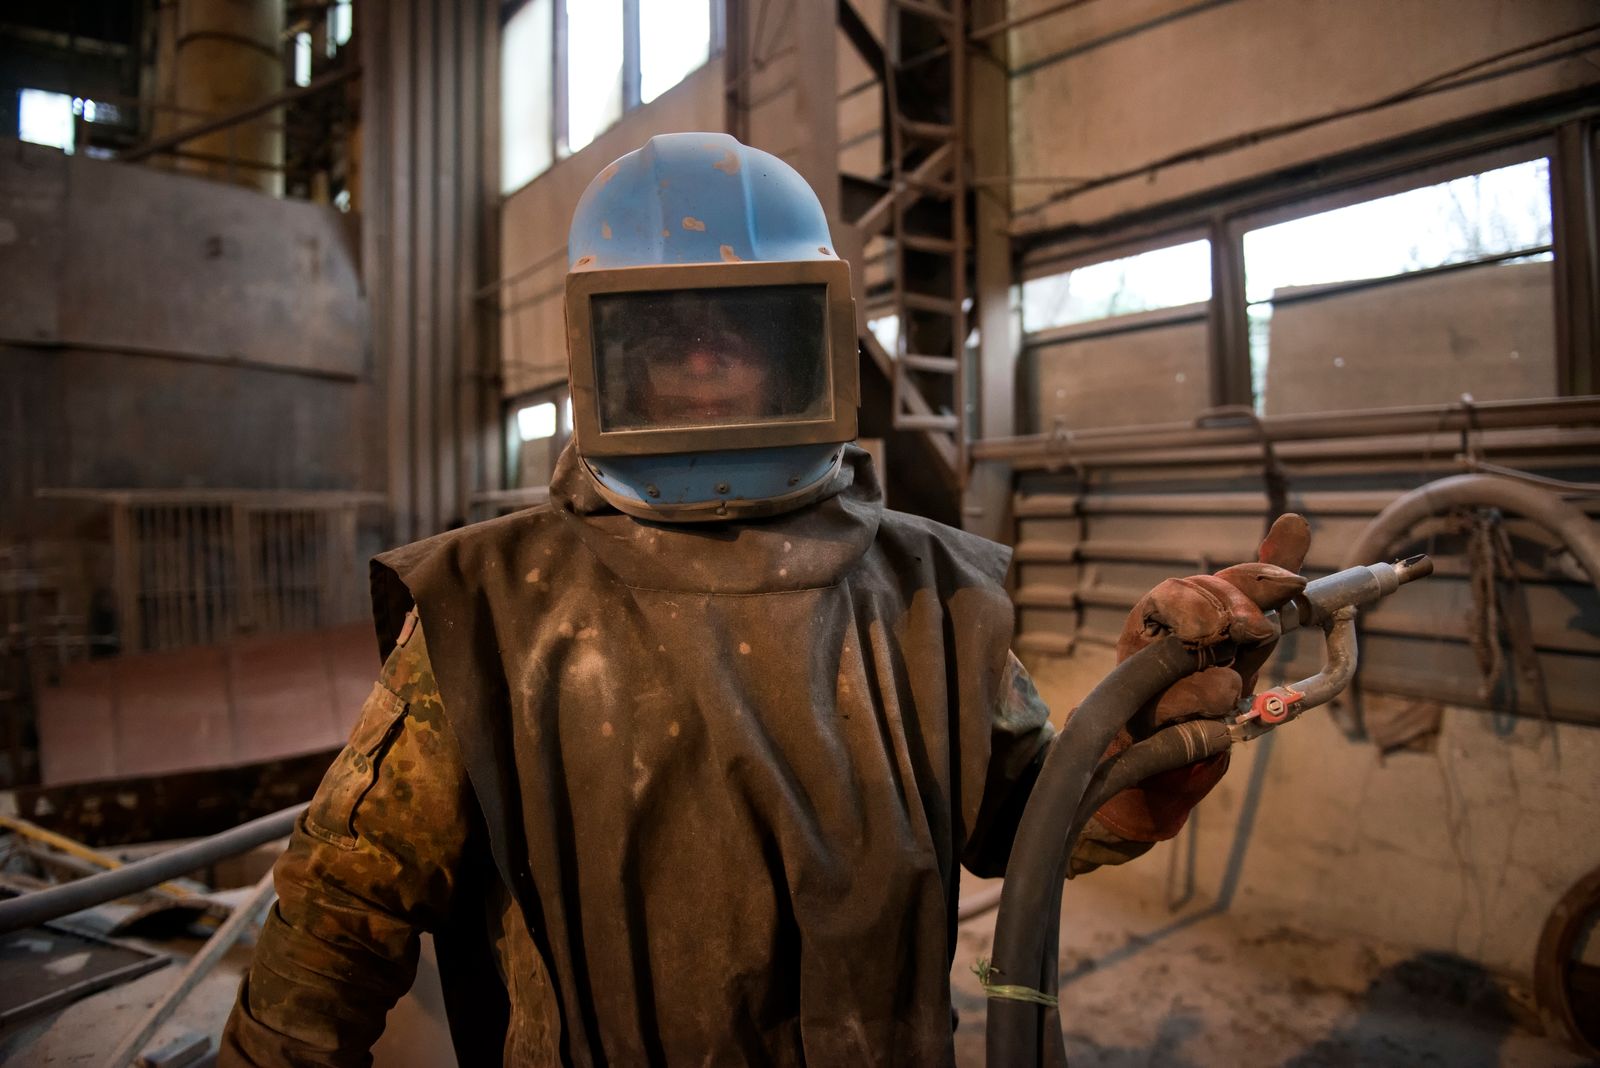 © Pierpaolo Mittica - the suit to protect the worker during the scrap metal sandblasting